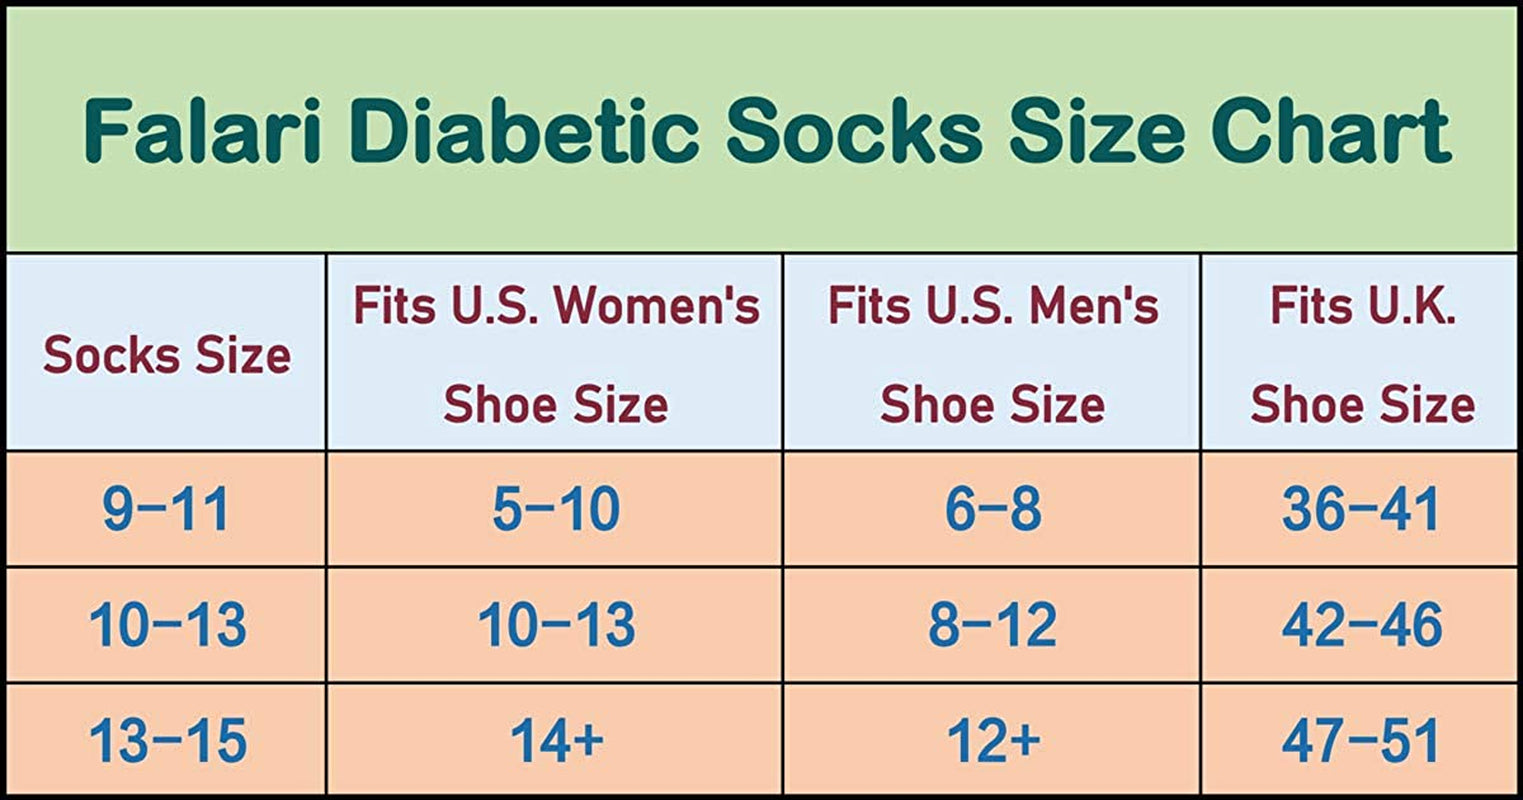 Physicians Approved Diabetic Socks Crew Unisex 3, 6 or 12-Pack